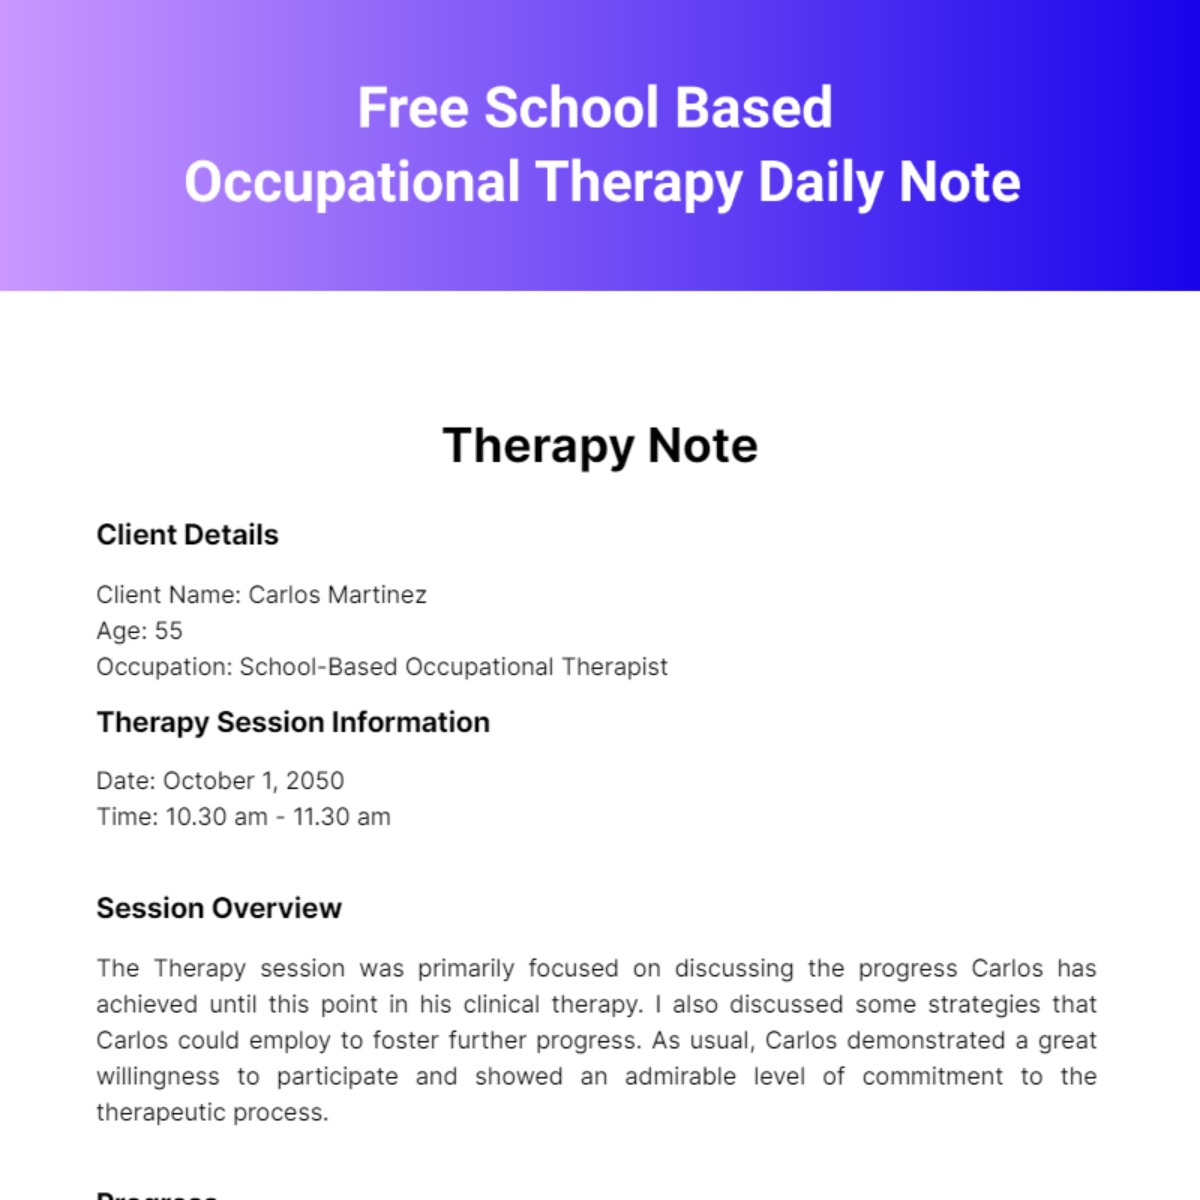 Free School Based Occupational Therapy Daily Note Template